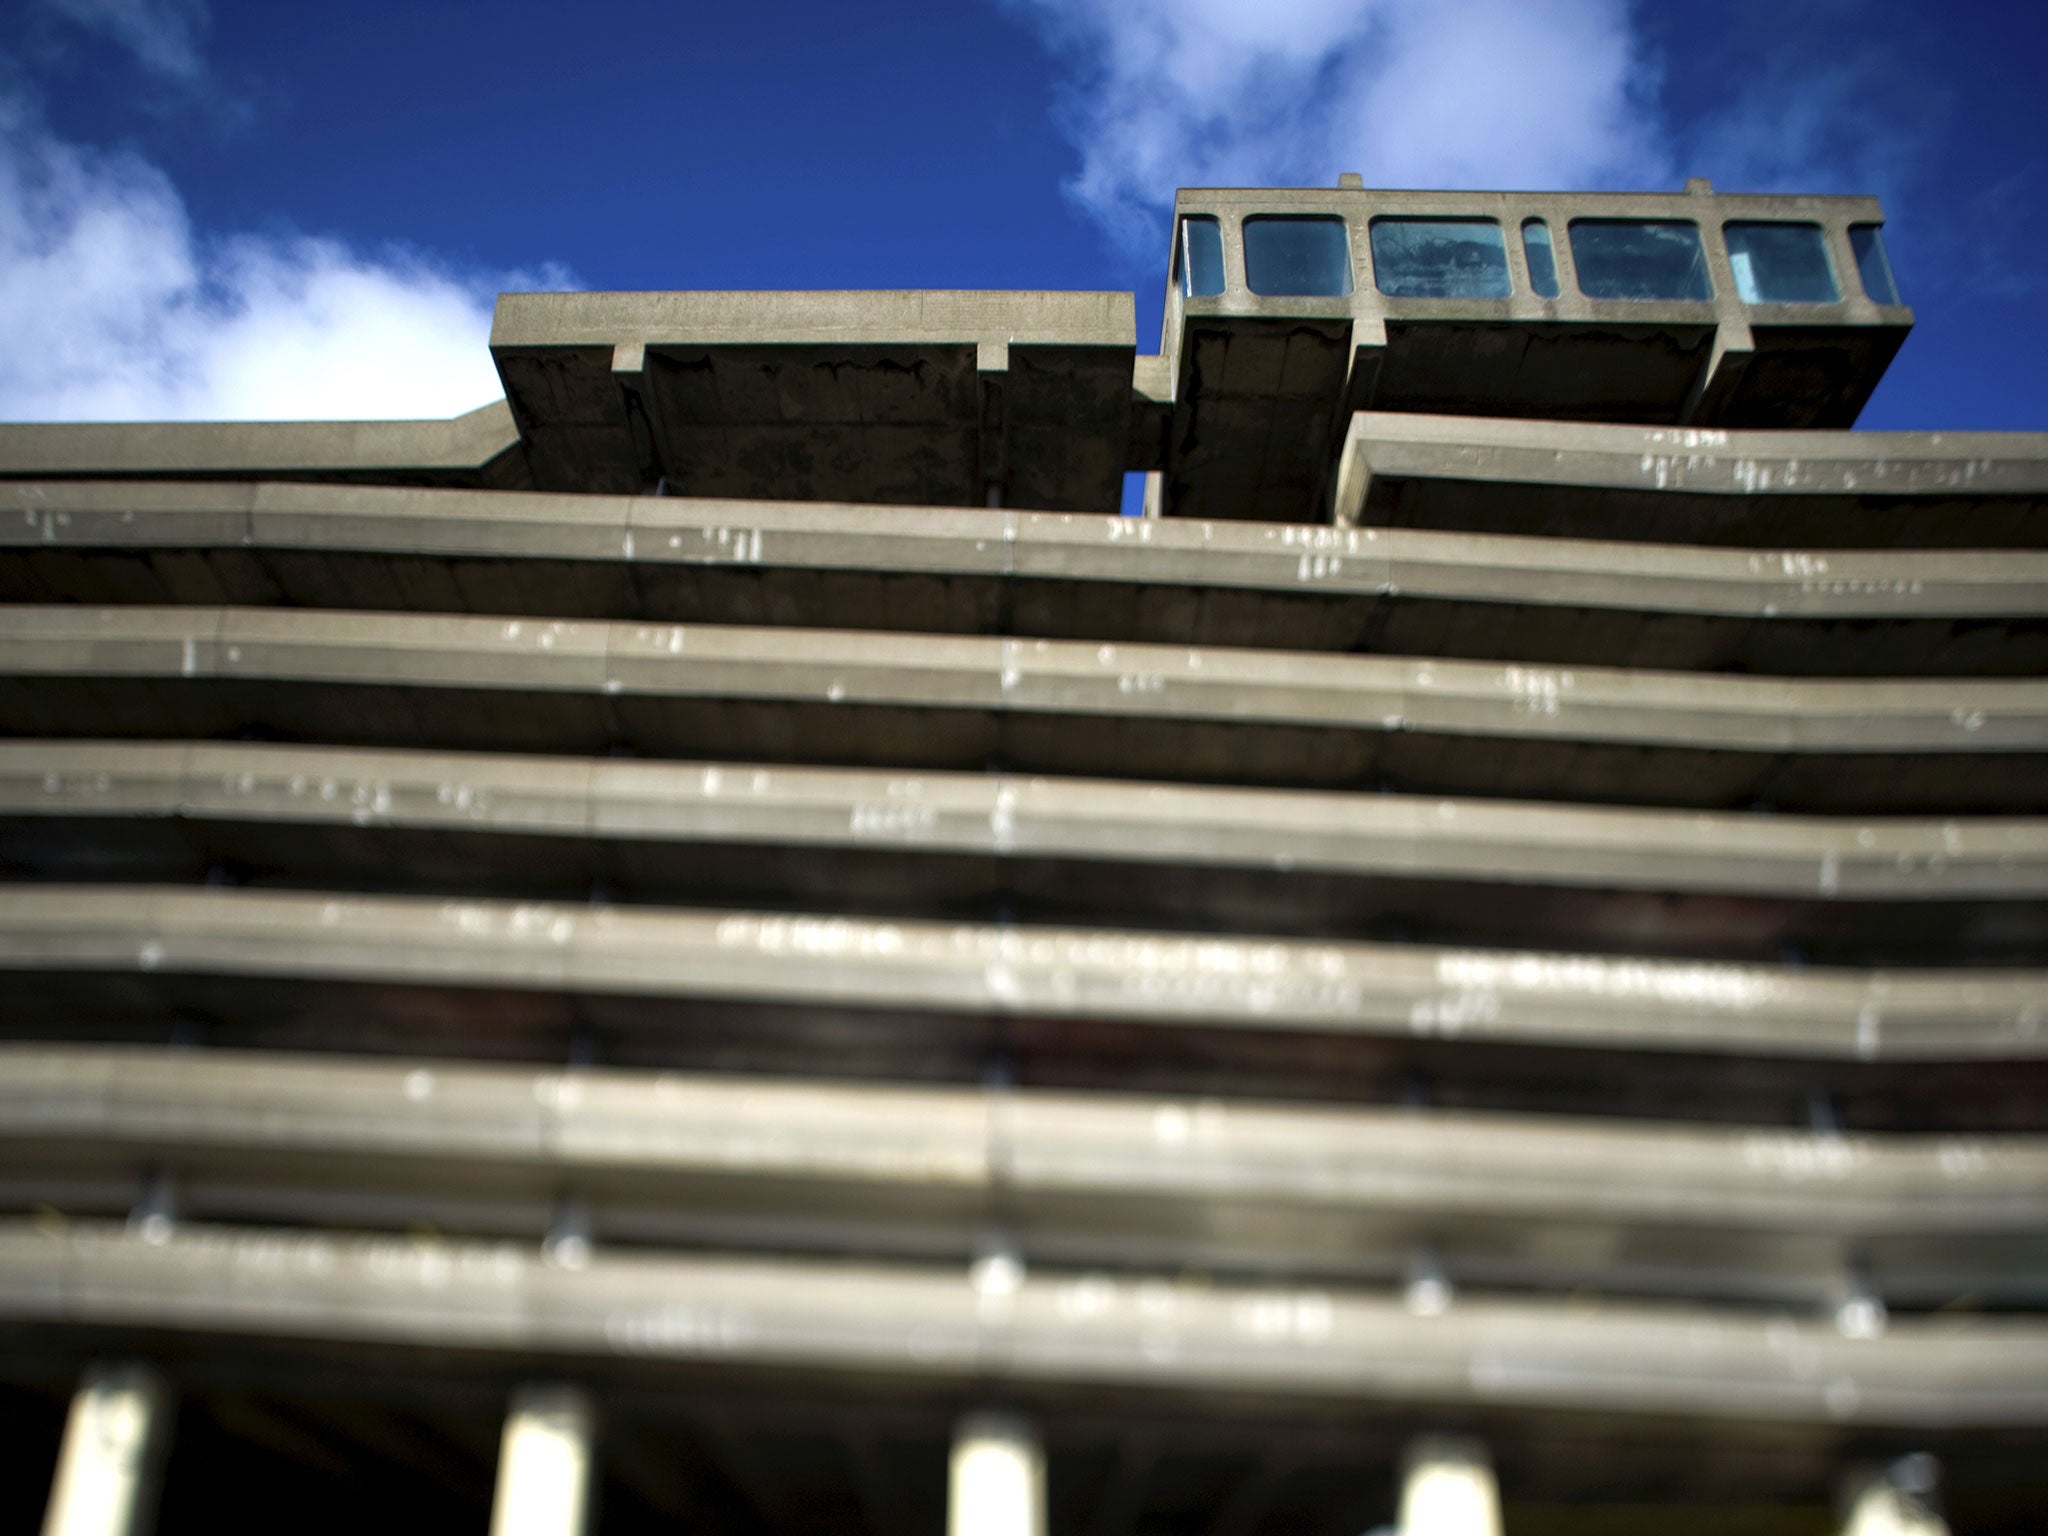 The “Get Carter” car park in Gateshead was celebrated for the brutalism of its architecture